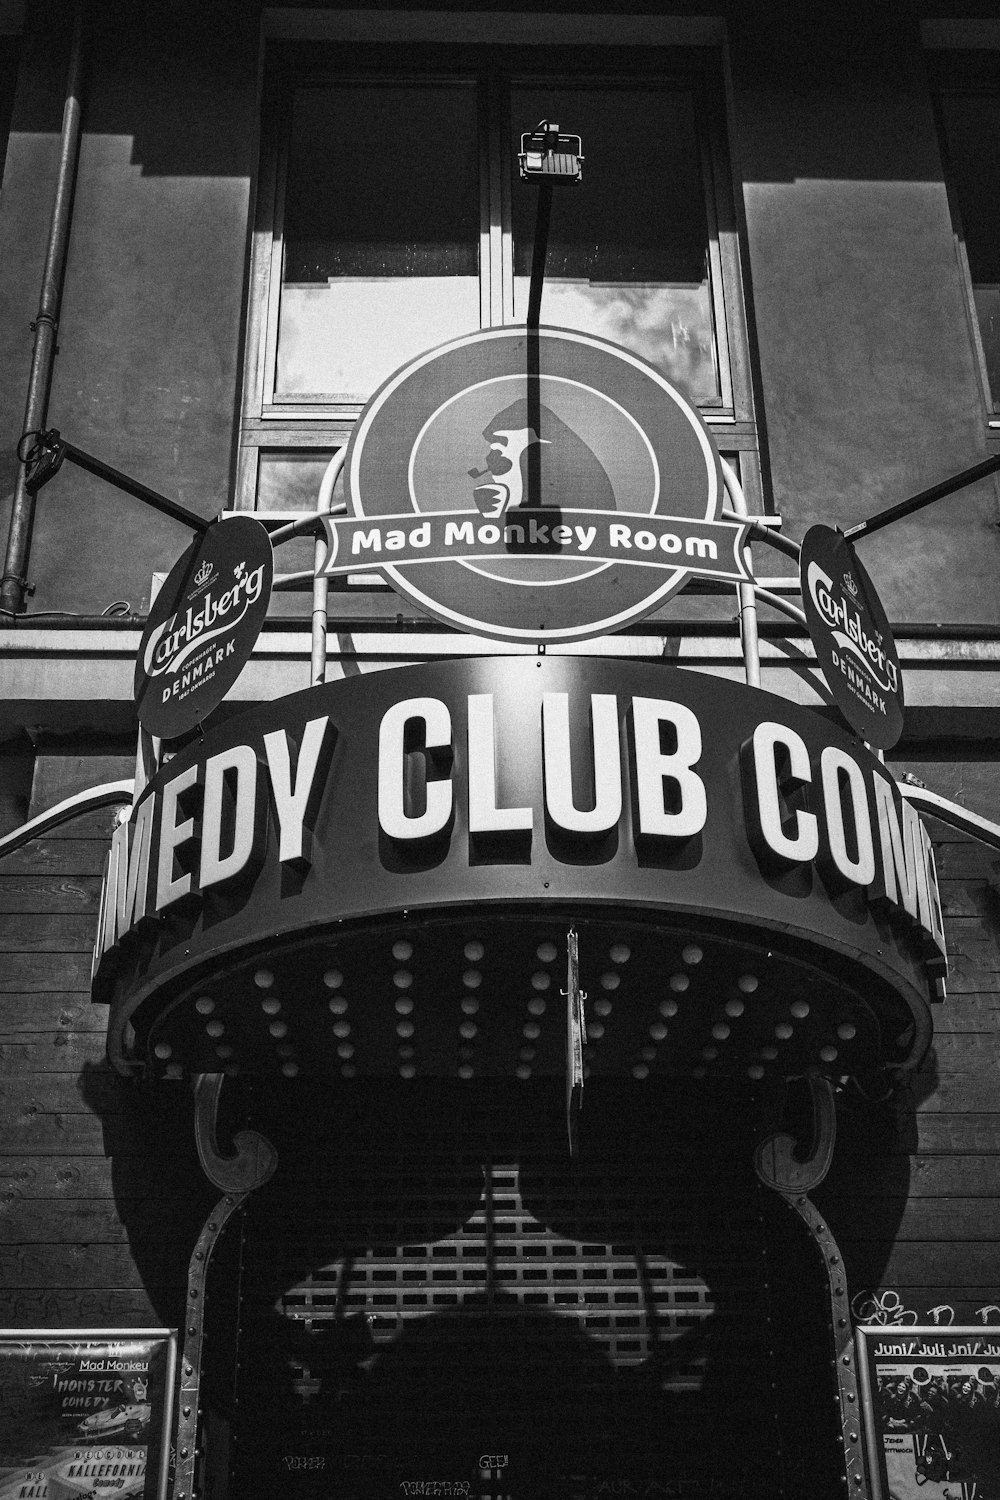 a black and white photo of a sign on a building